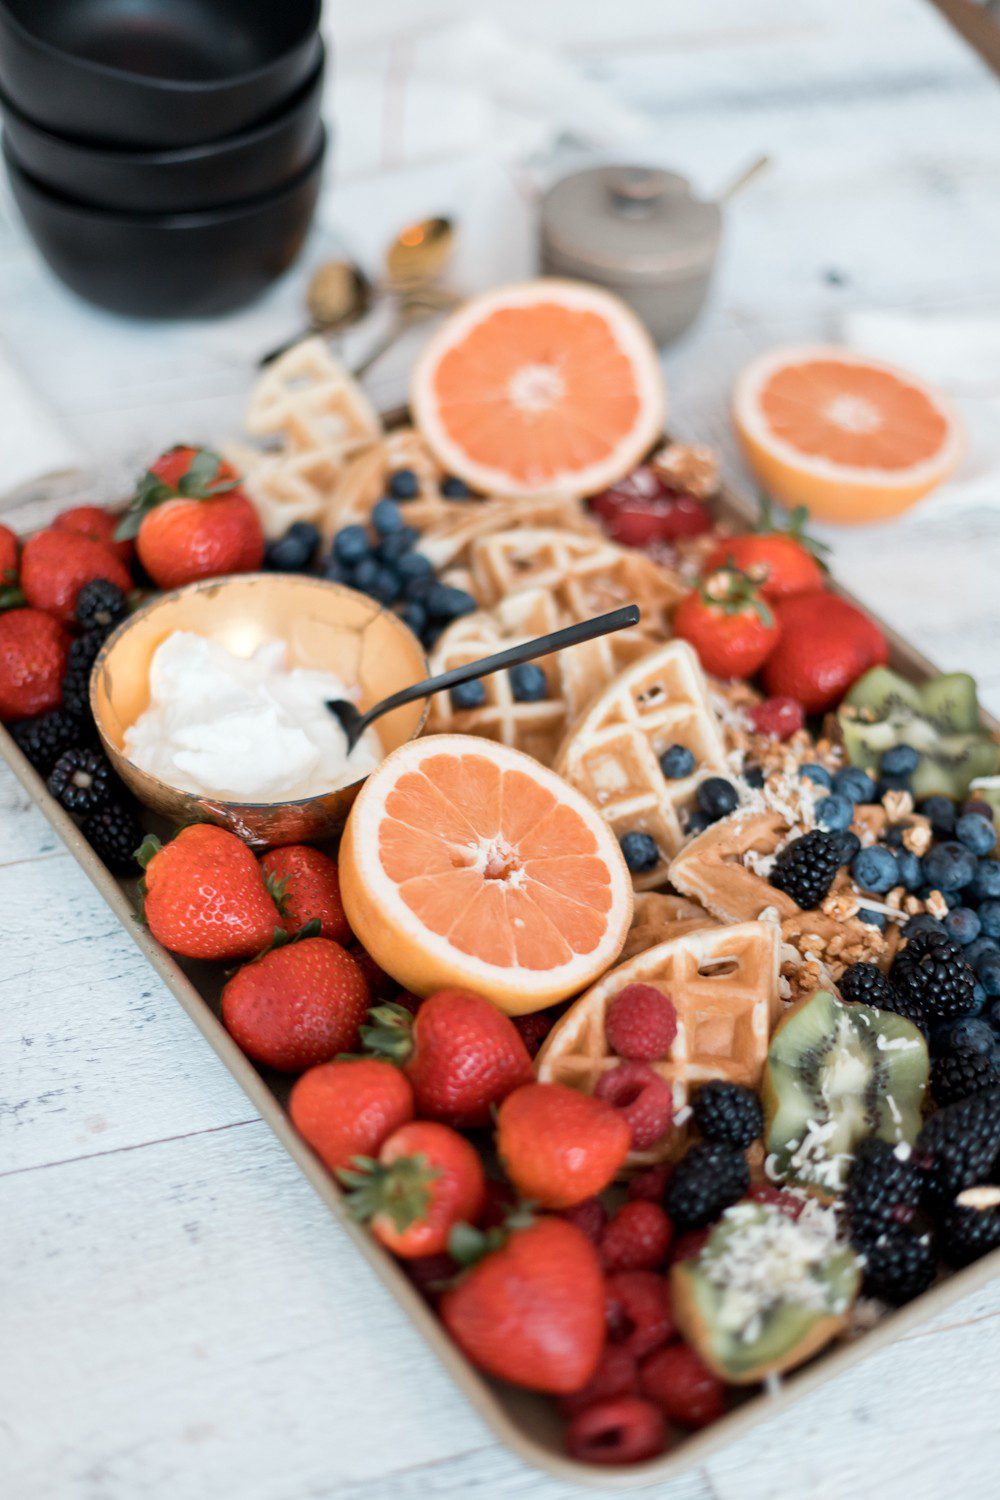  DIY Yogurt Parfait Recipe Ideas with Protein for Kids They'll Love by popular Florida lifestyle blog, Fresh Mommy: image of kiwis, strawberries, blackberries, blueberries, coconut, grapefruits, waffles, and Fage greek yogurt on a tray.